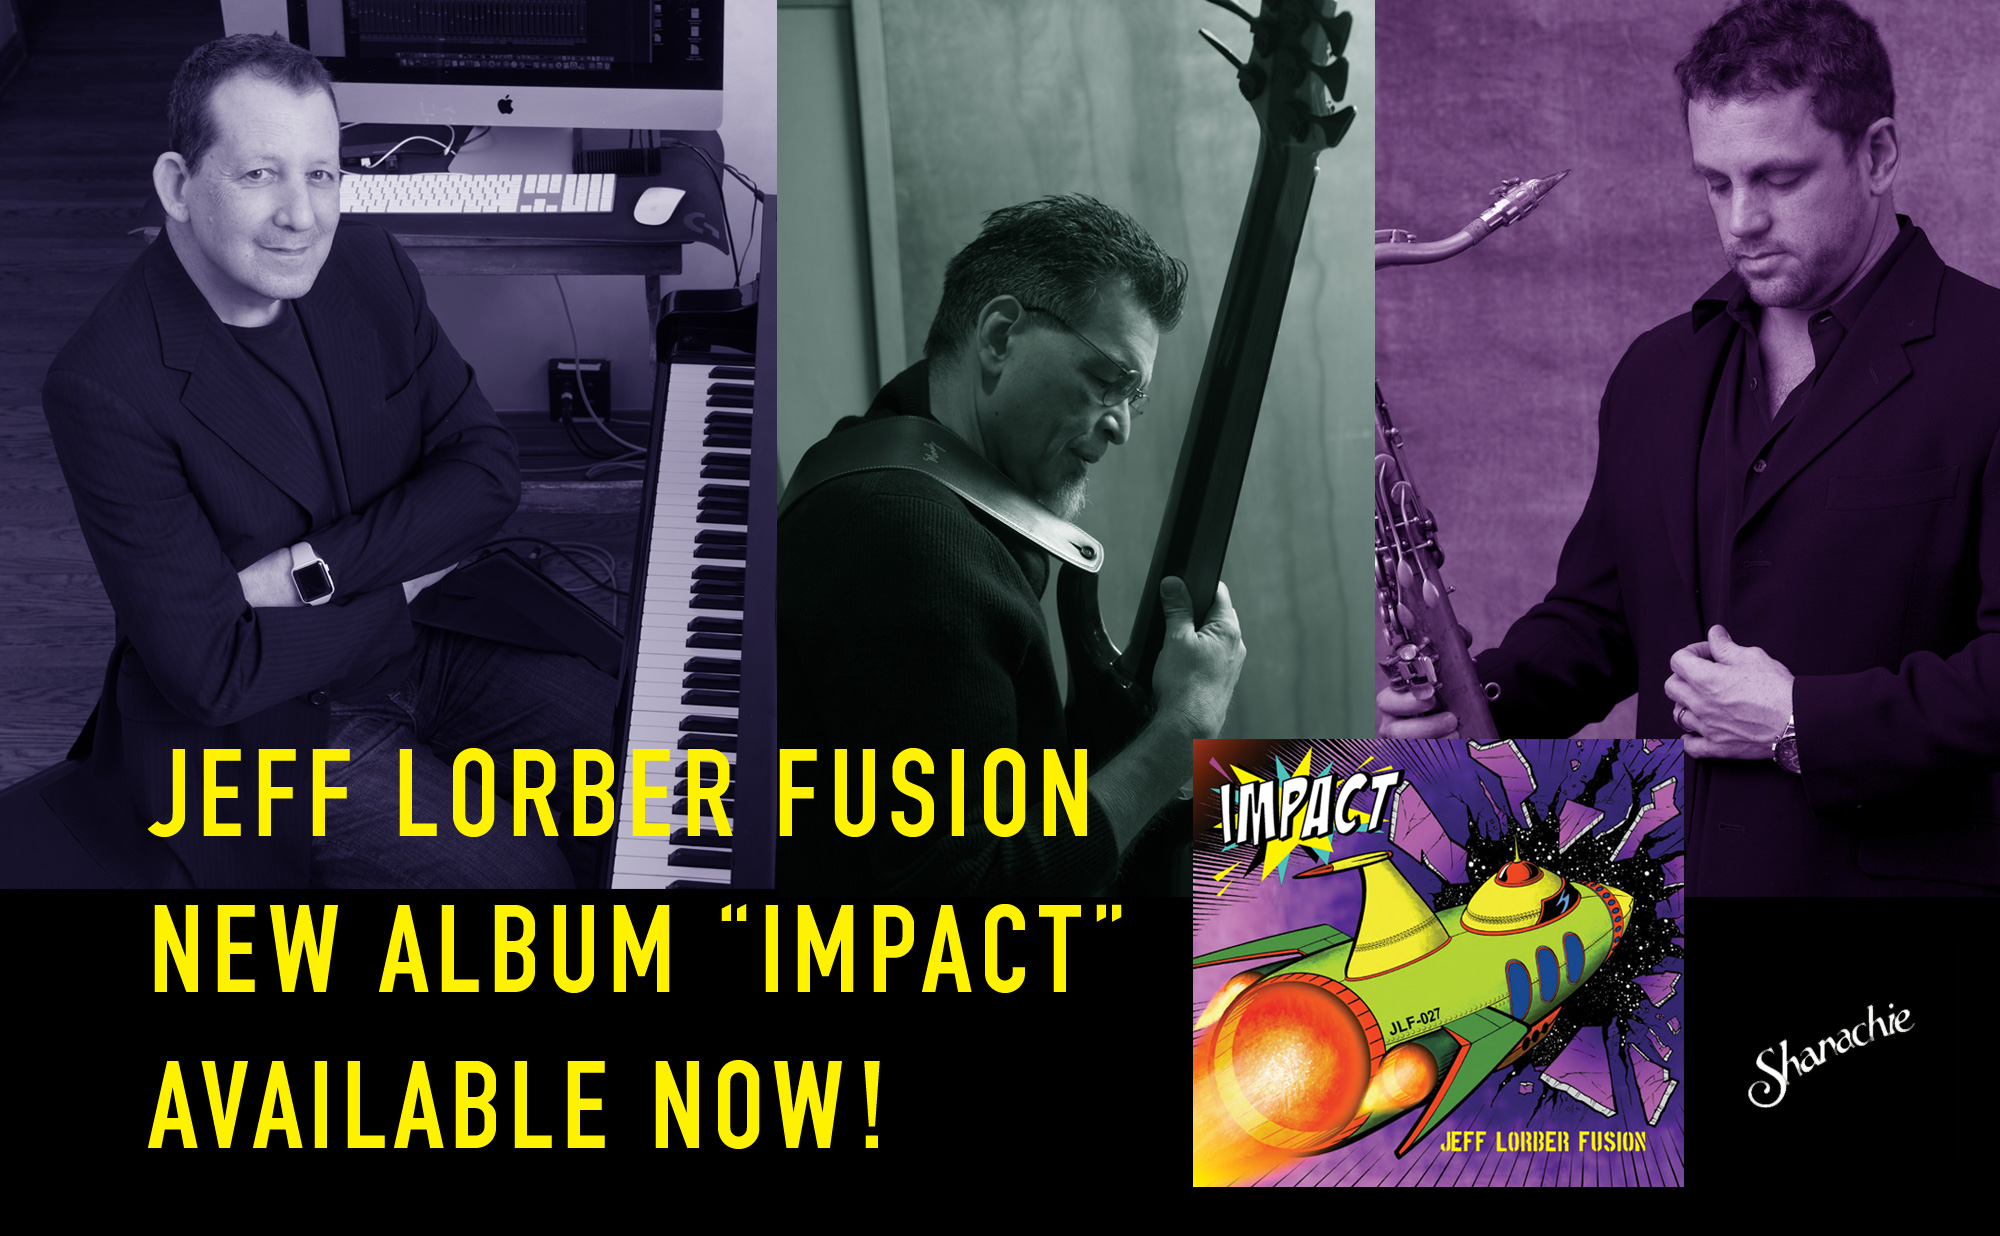 jeff lorber fusion discography torrent